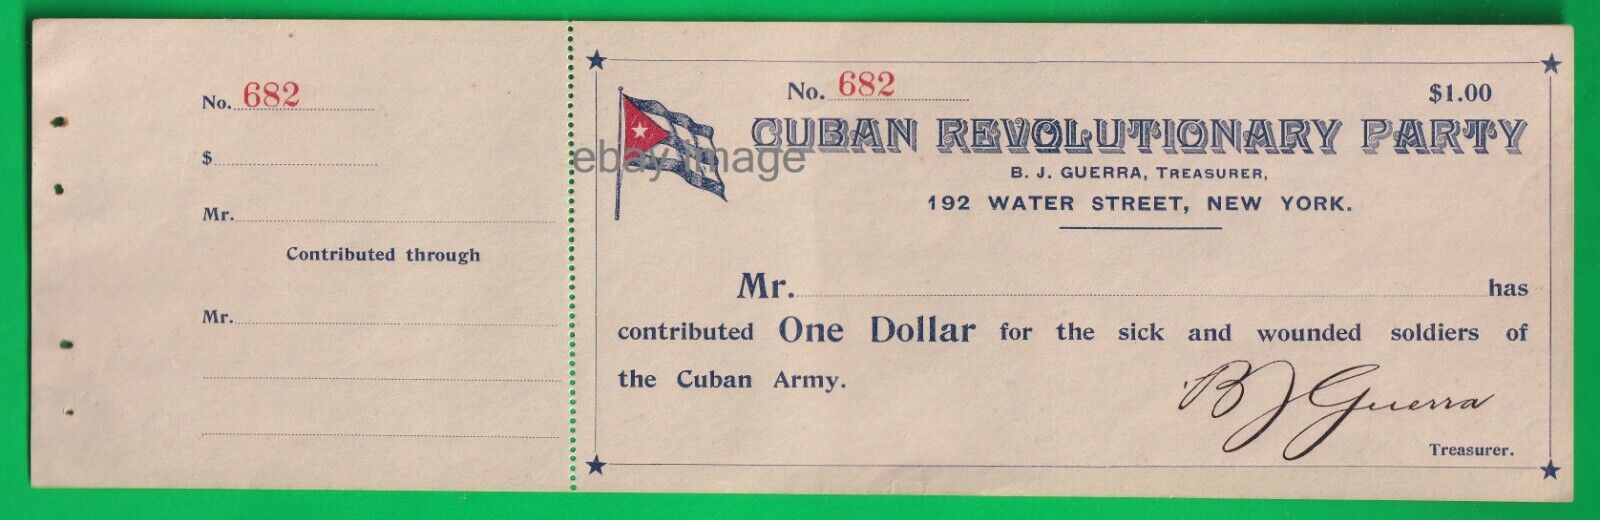 Cuba contribution bond to the Cuban Revolutionary Party for the Mambi Army, 1897